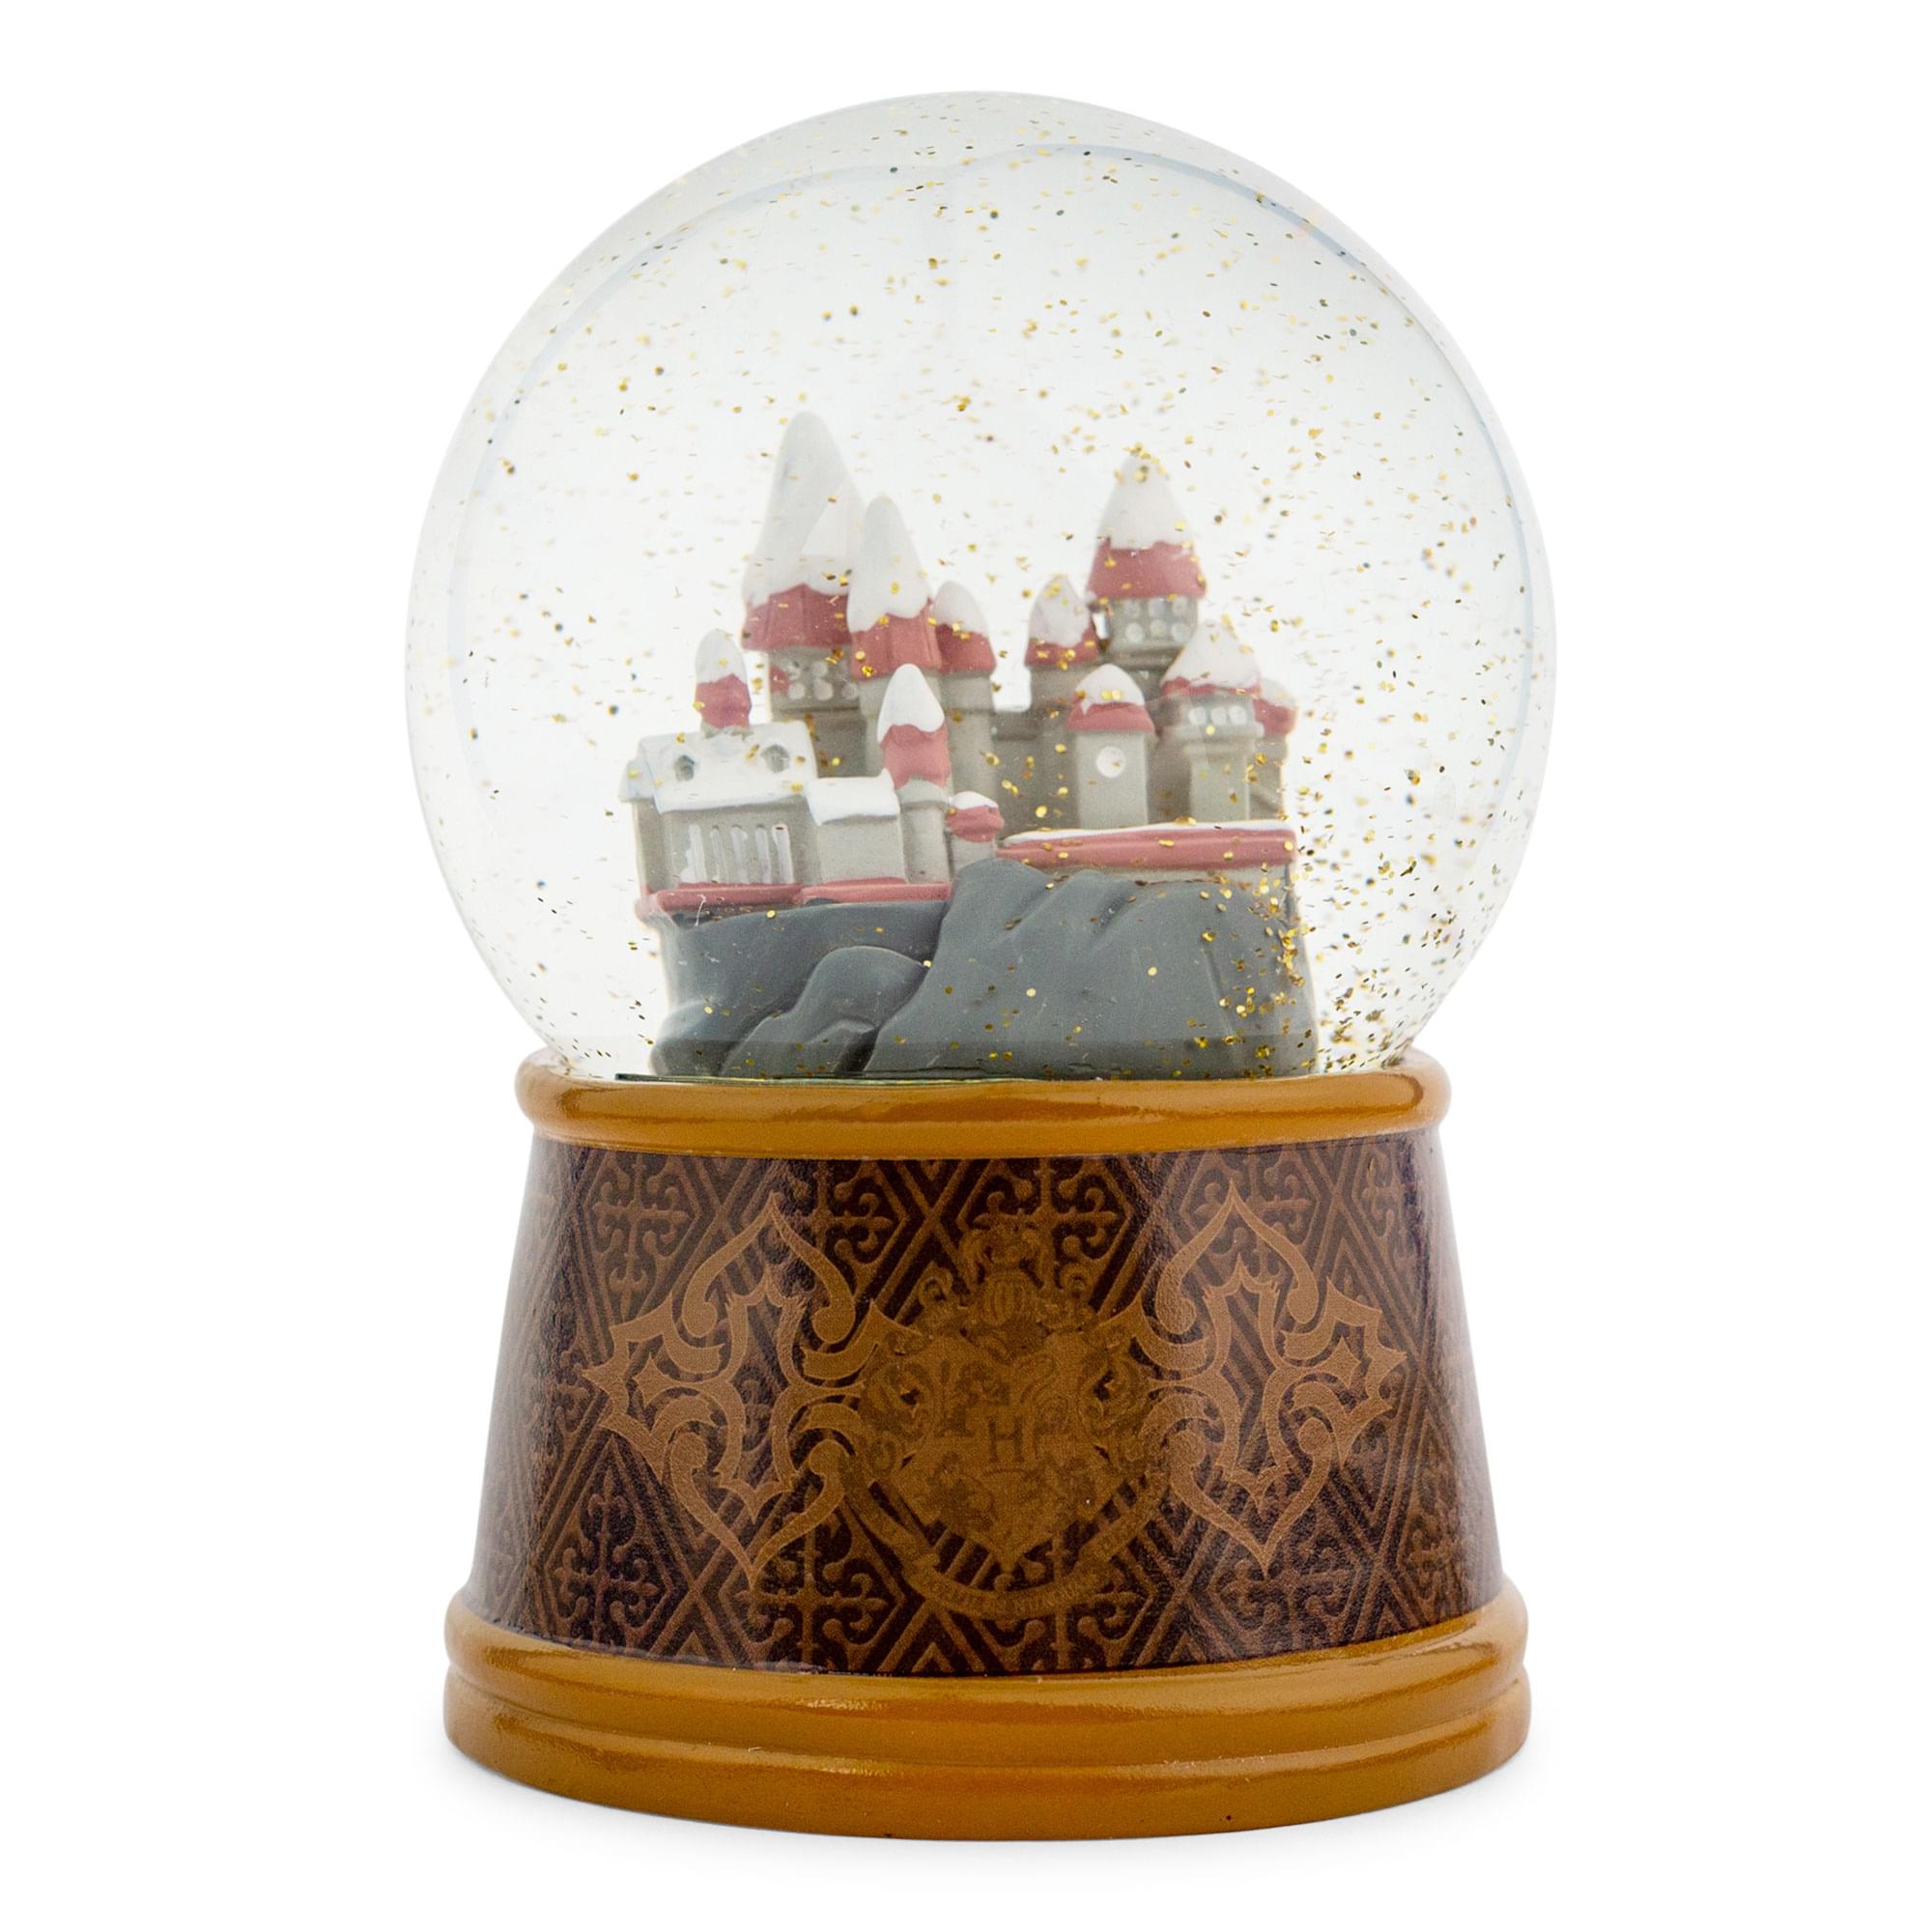 Harry Potter Hogwarts Castle Collectible Snow Globe | 6 Inches Tall - image 1 of 8